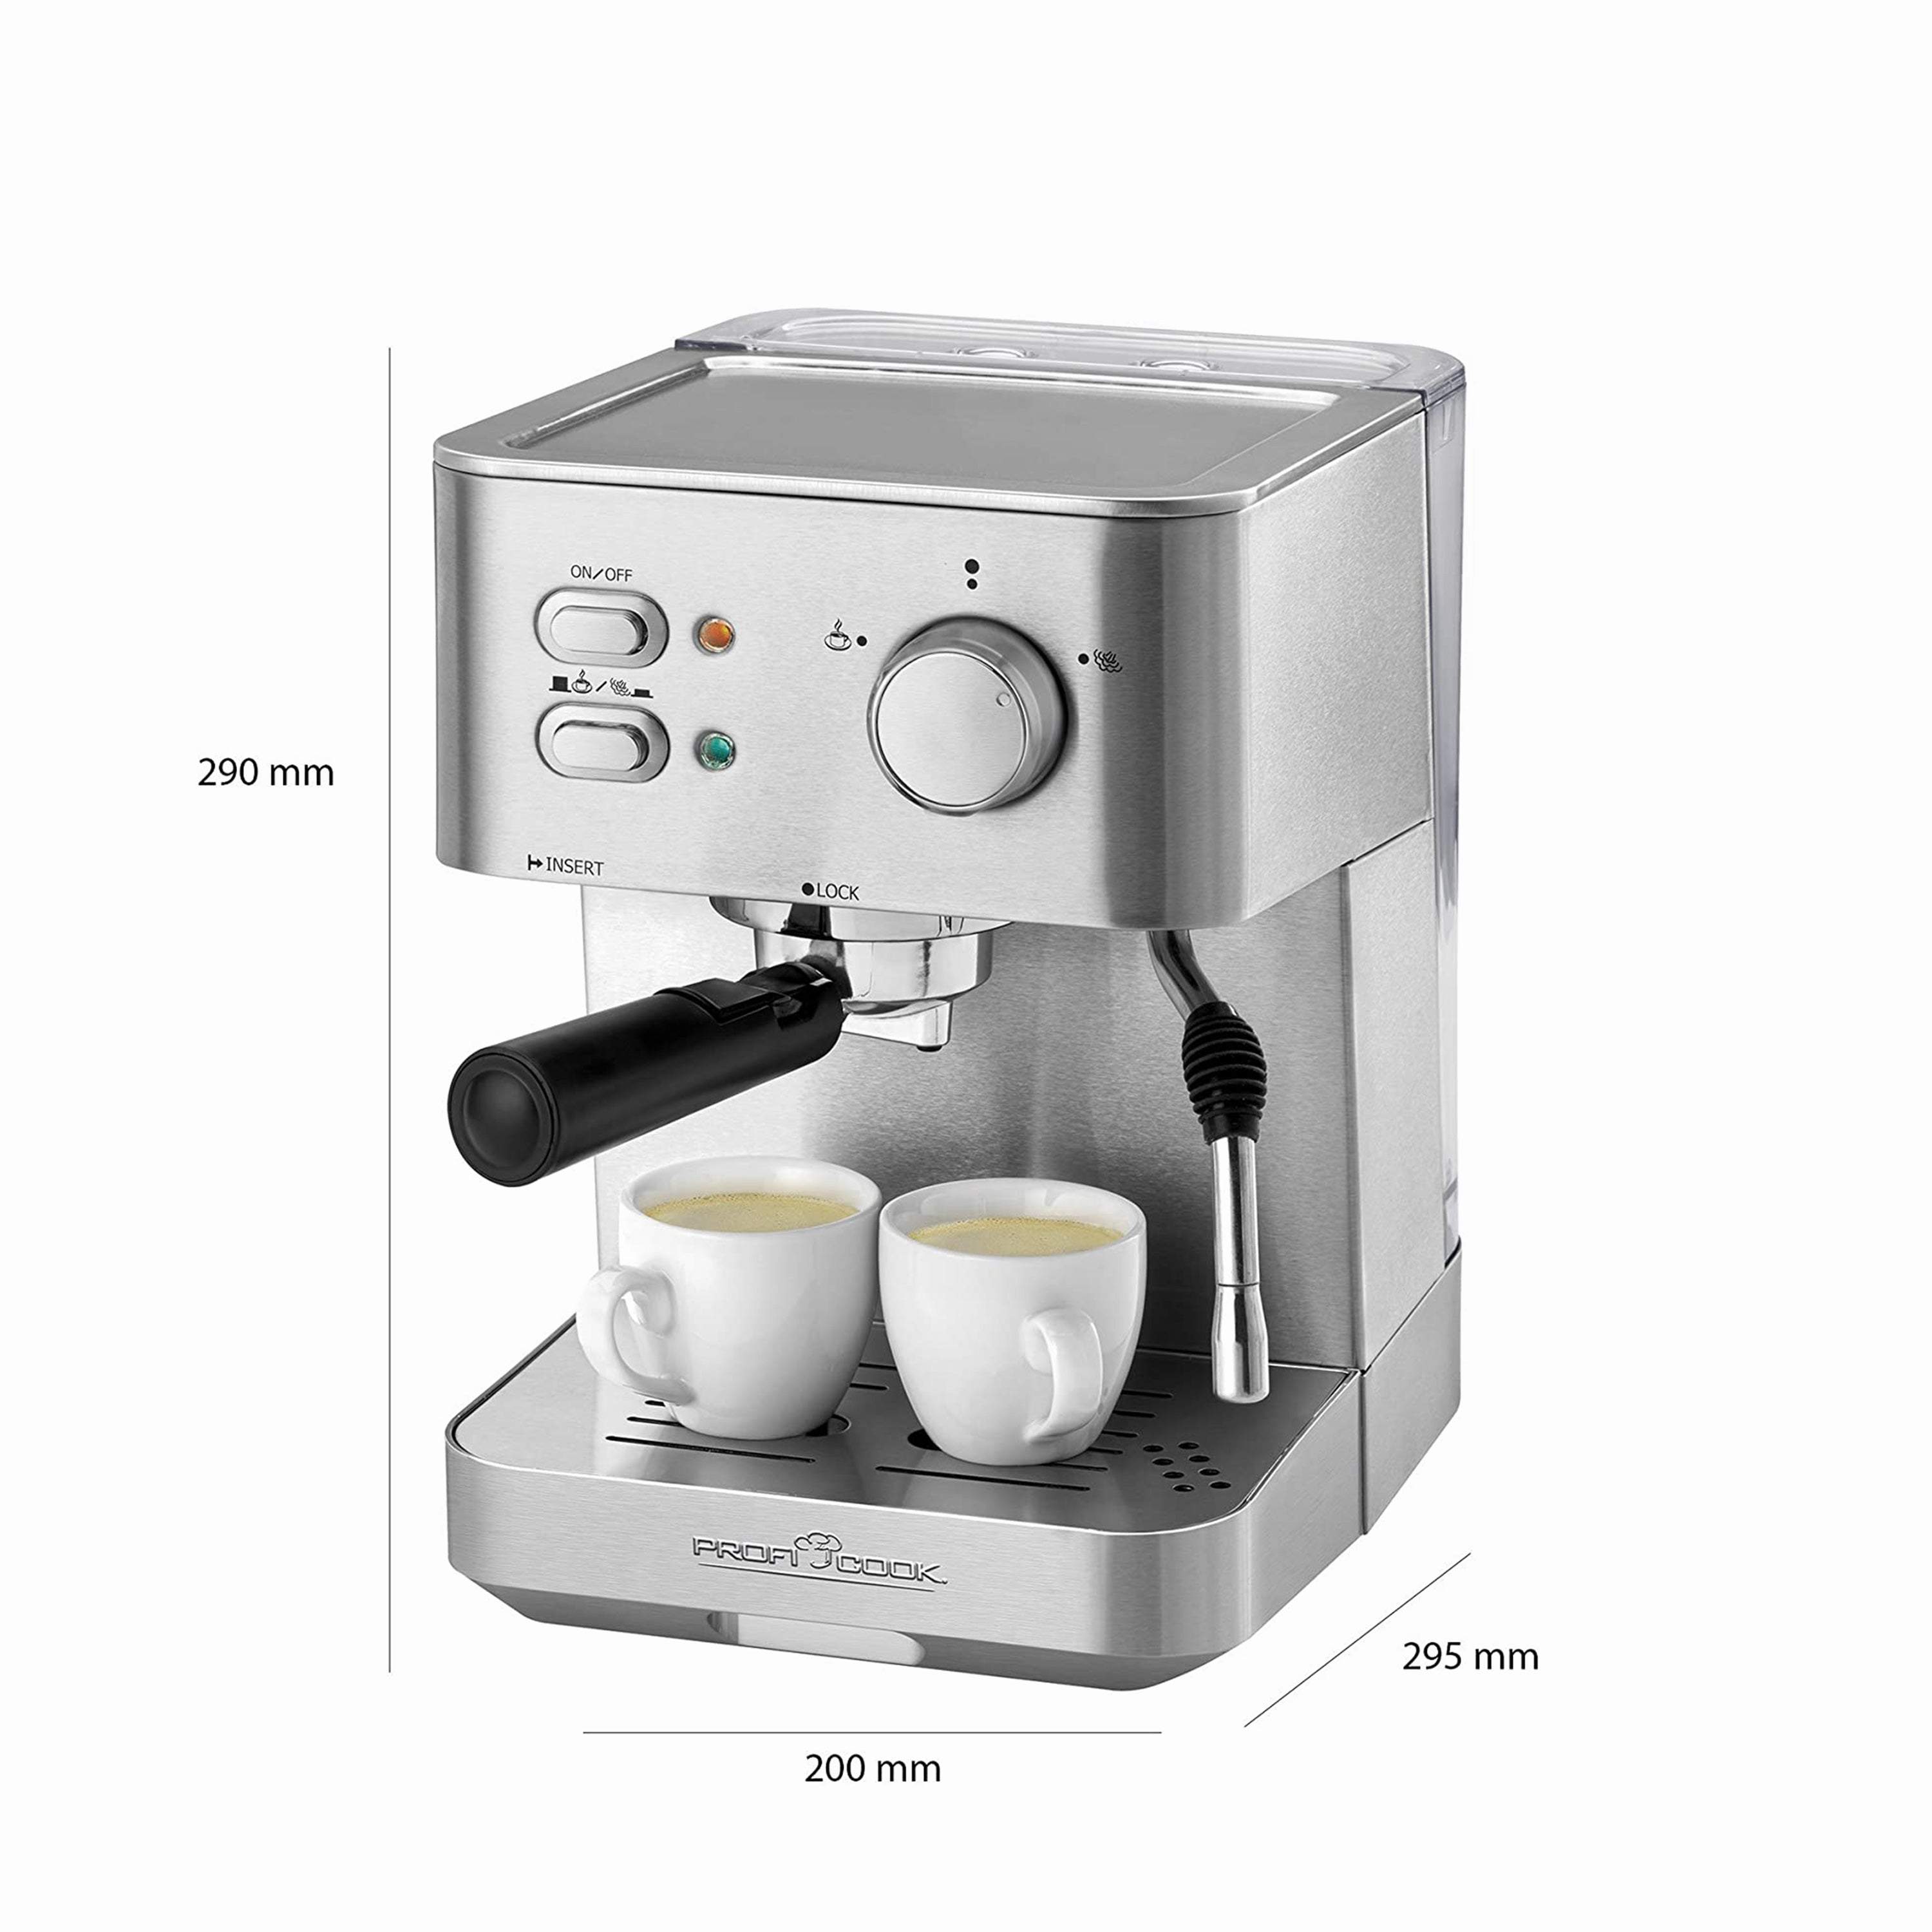 ProfiCook PC-ES 1209 Espresso Machine, 20 Bar Max. Pump Pressure, Cup Preheating Function, 1.8 Litre Water Tank, Stainless Steel-Royal Brands Co-